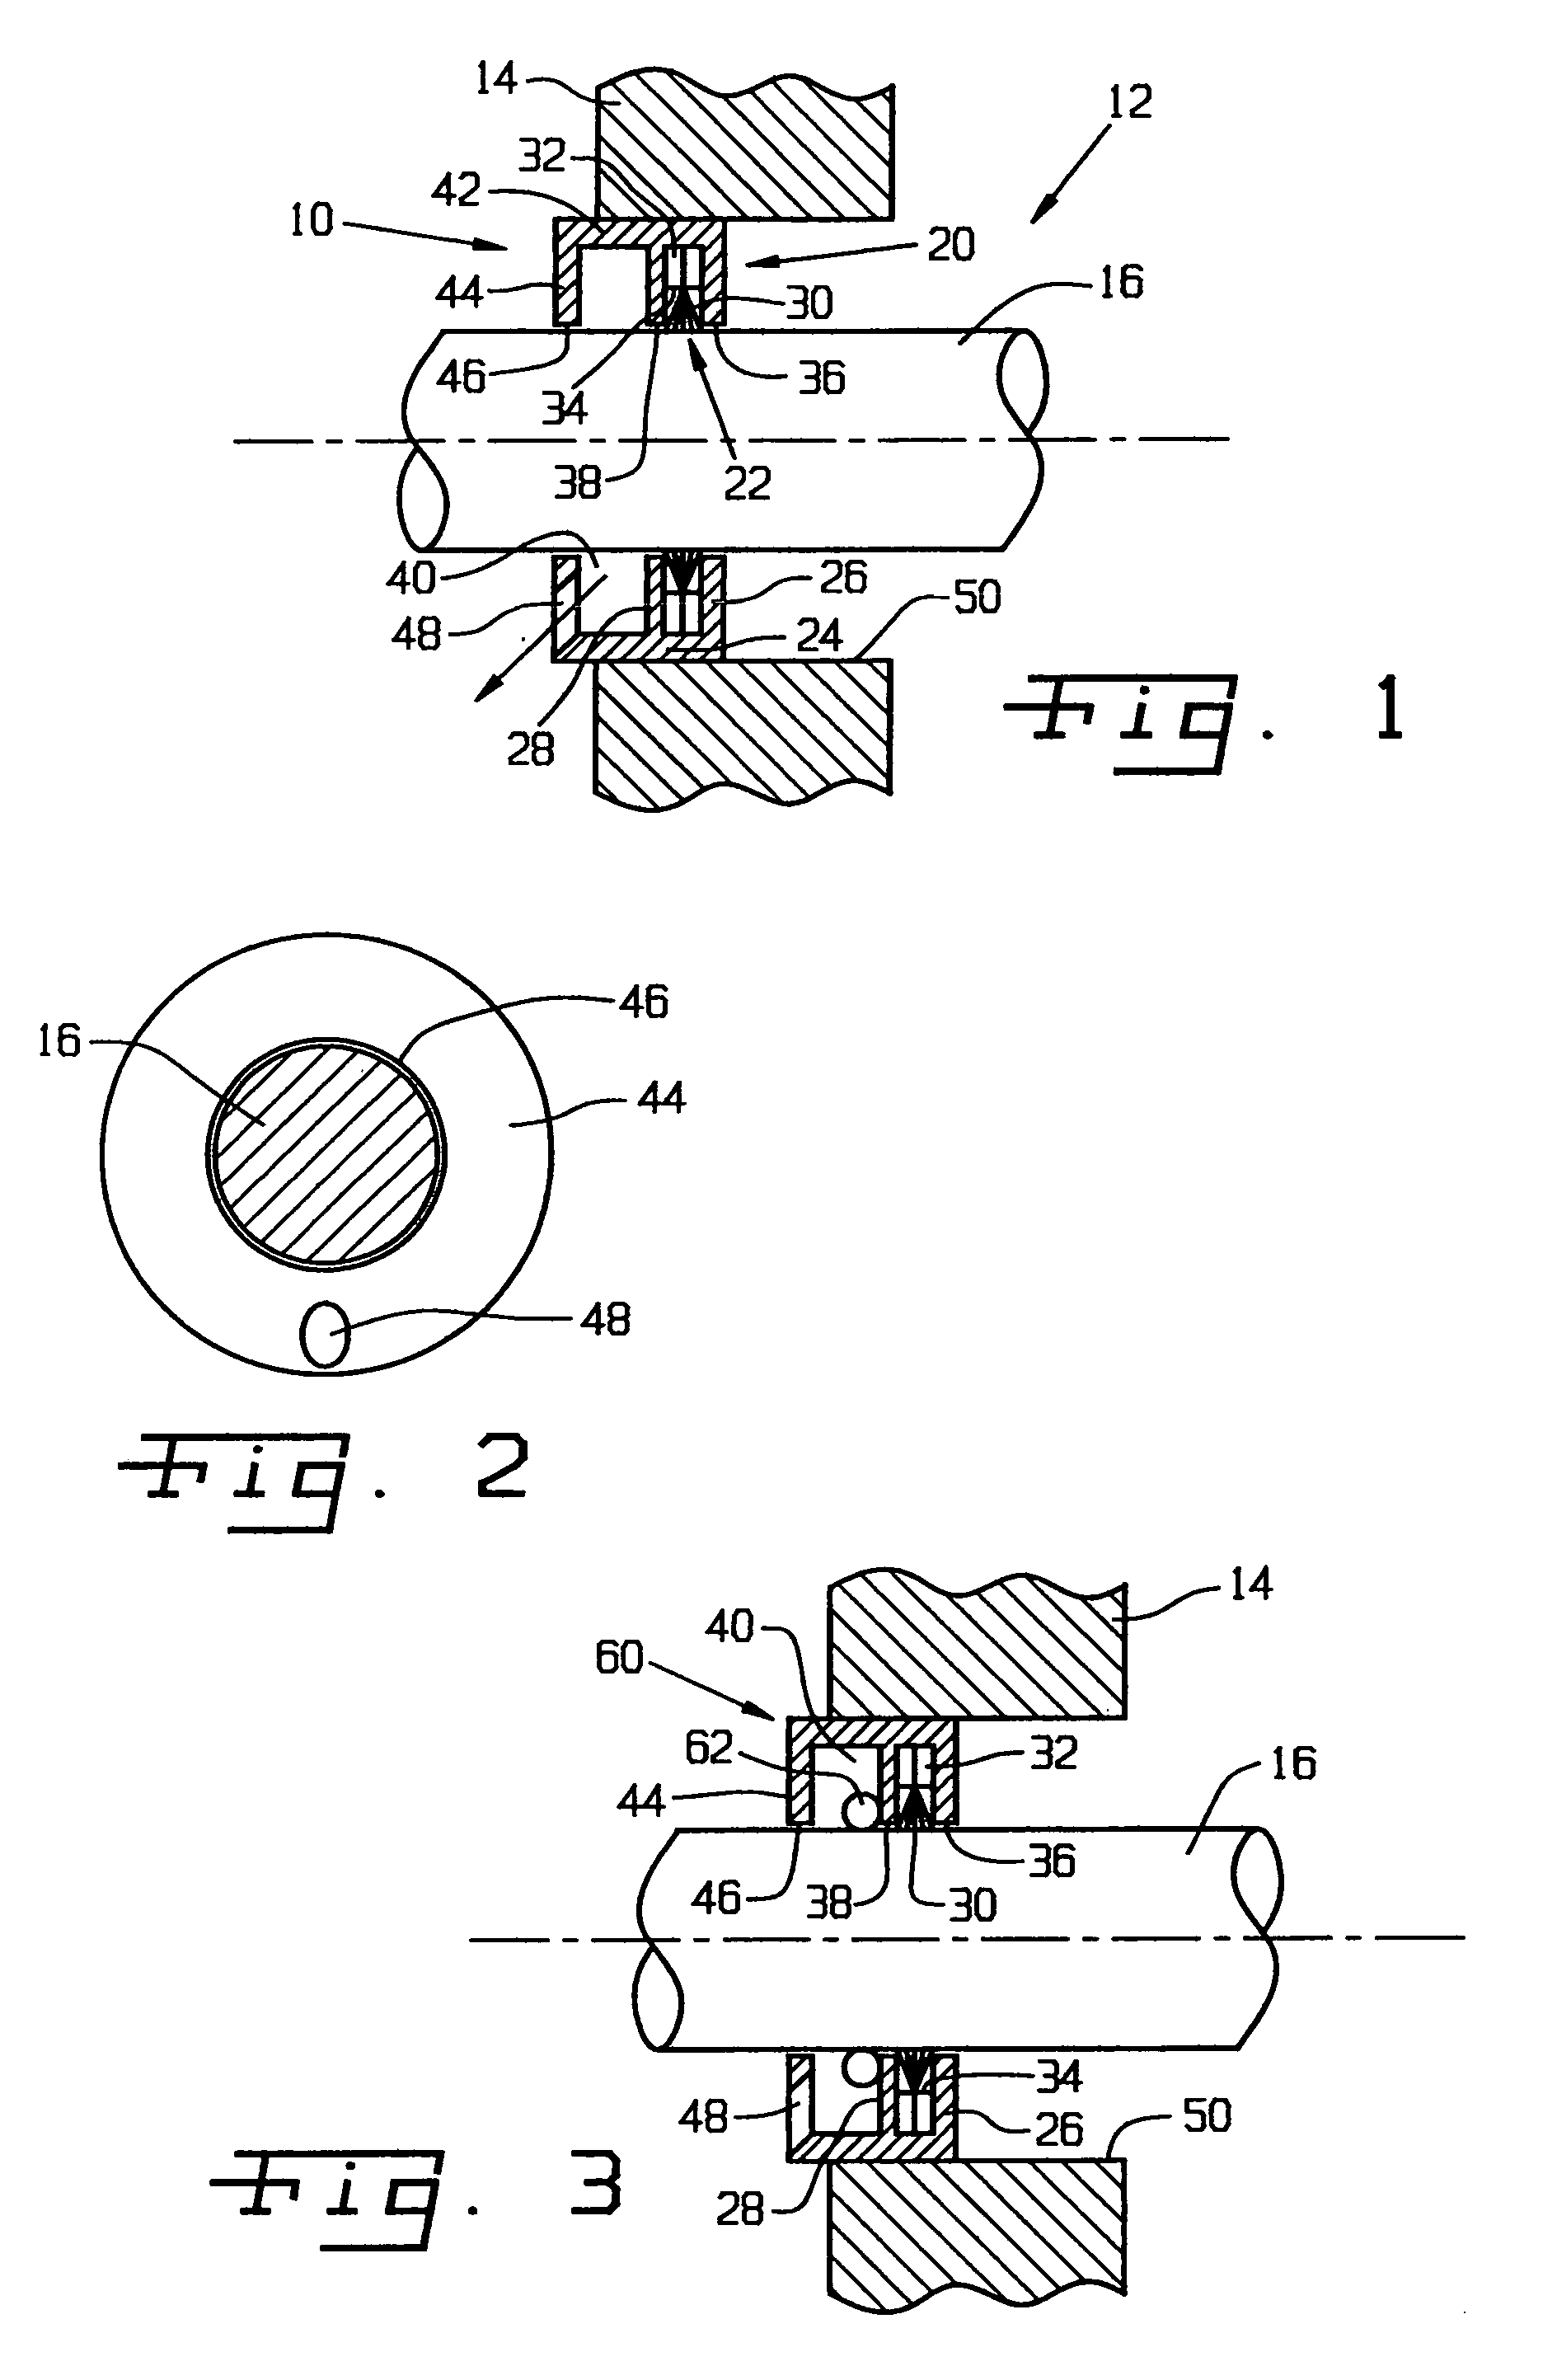 Shaft current control brush assembly with drainage